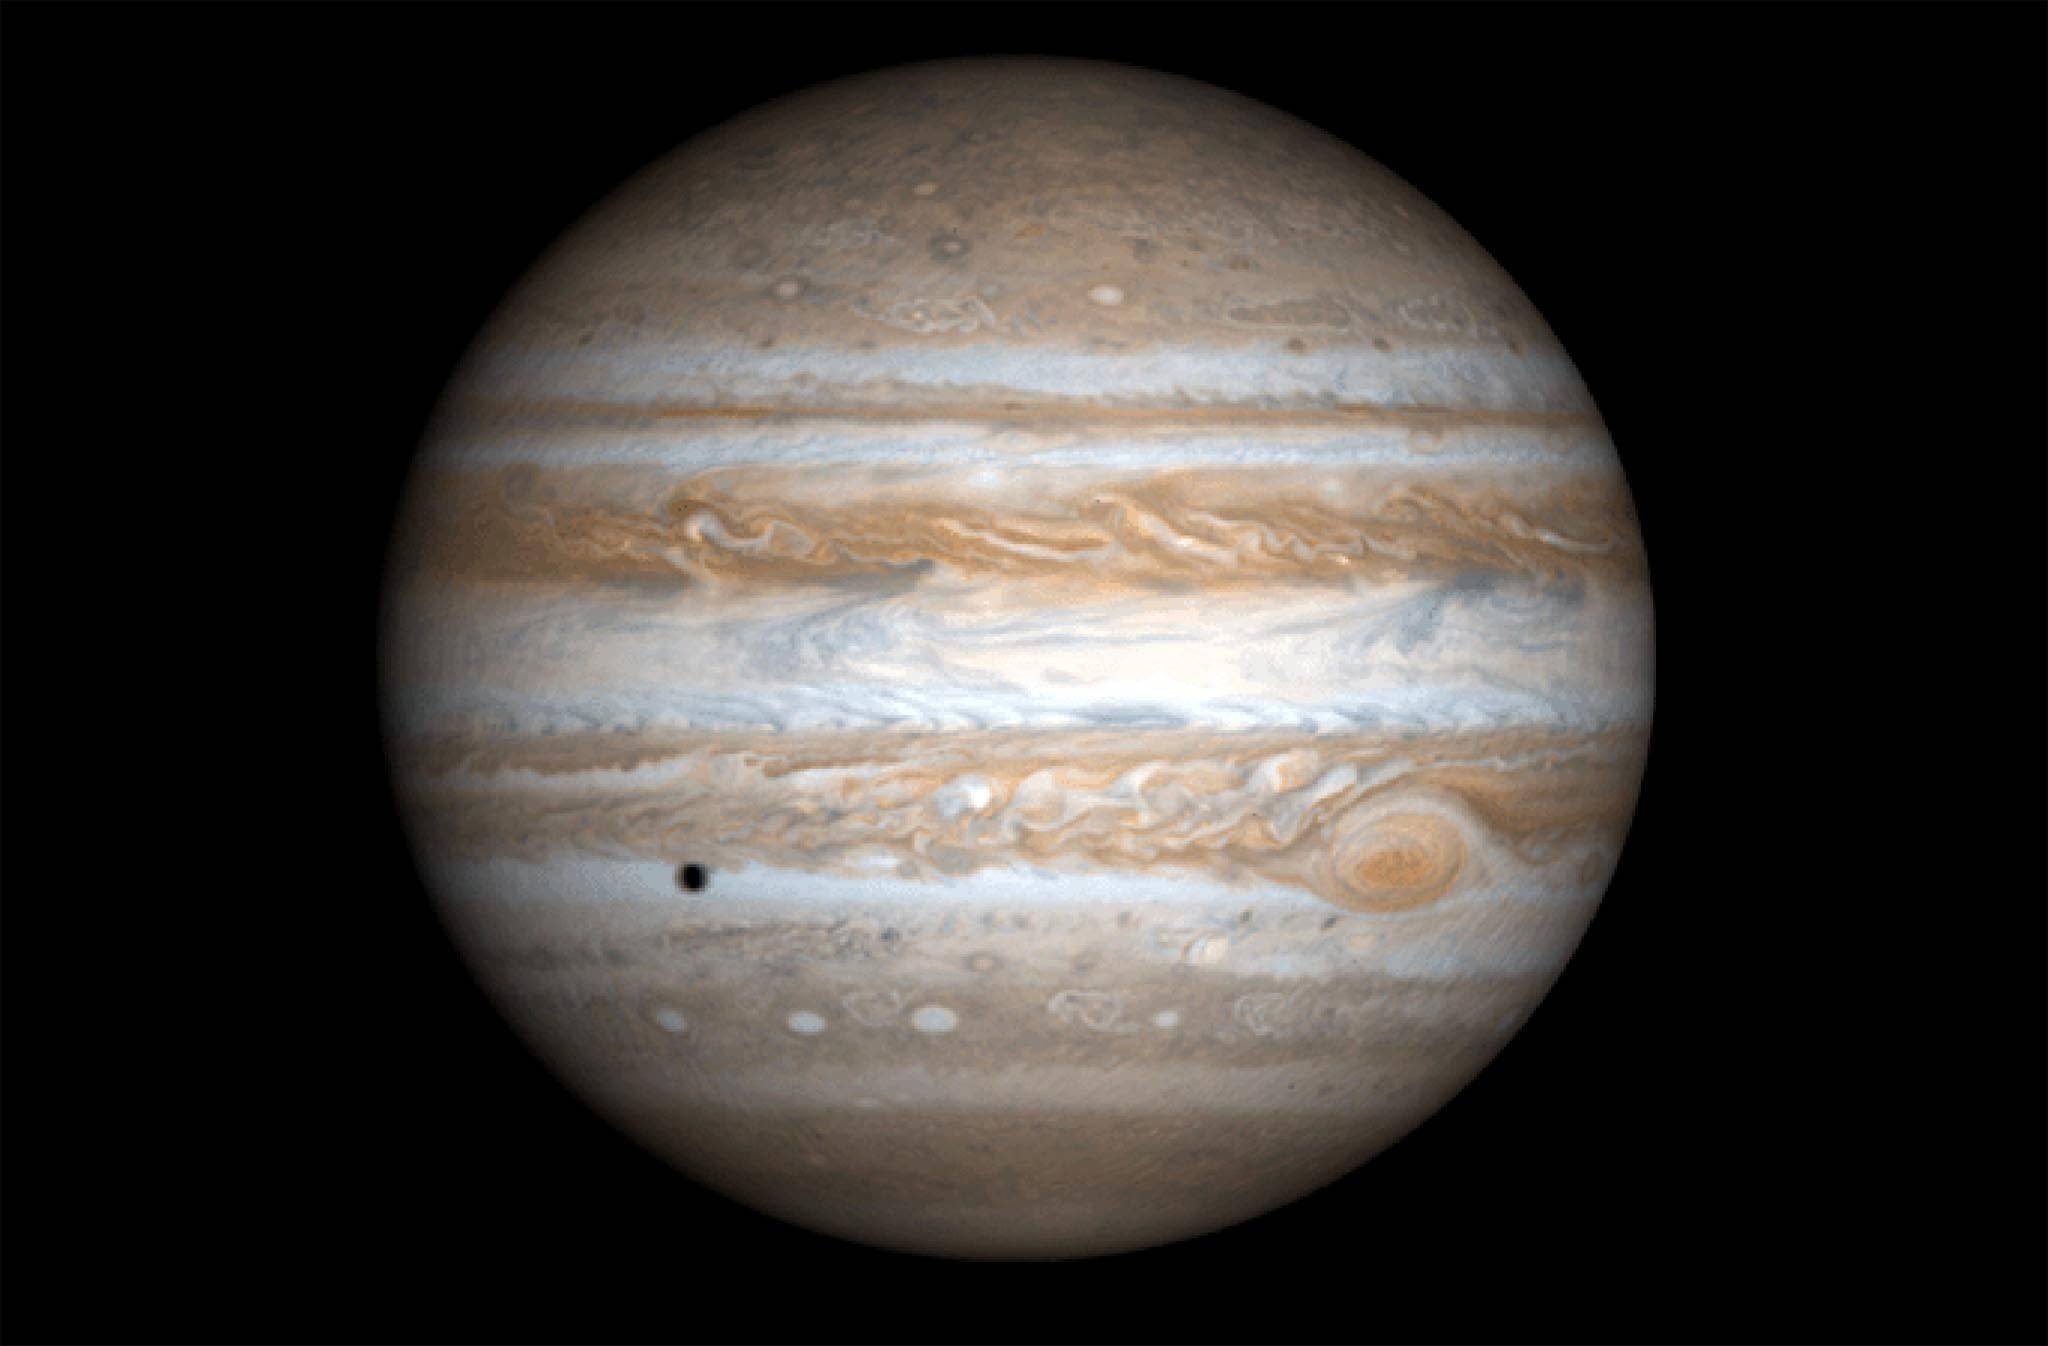 This true-color simulated view of Jupiter released 30 December, 2000 by NASA is composed of four images taken by NASA's Cassini spacecraft on 07 December, 2000. To illustrate what Jupiter would have looked like if the cameras had a field-of-view large enough to capture the entire planet, the cylindrical map was projected onto a globe. Cassini is a cooperative mission of NASA, the European Space Agency and the Italian Space Agency. JPL, a division of the California Institute of Technology in Pasadena, manages Cassini for NASA's Office of Space Science in Washington, D.C.  AFP PHOTO/NASA / AFP PHOTO / NASA / NASA